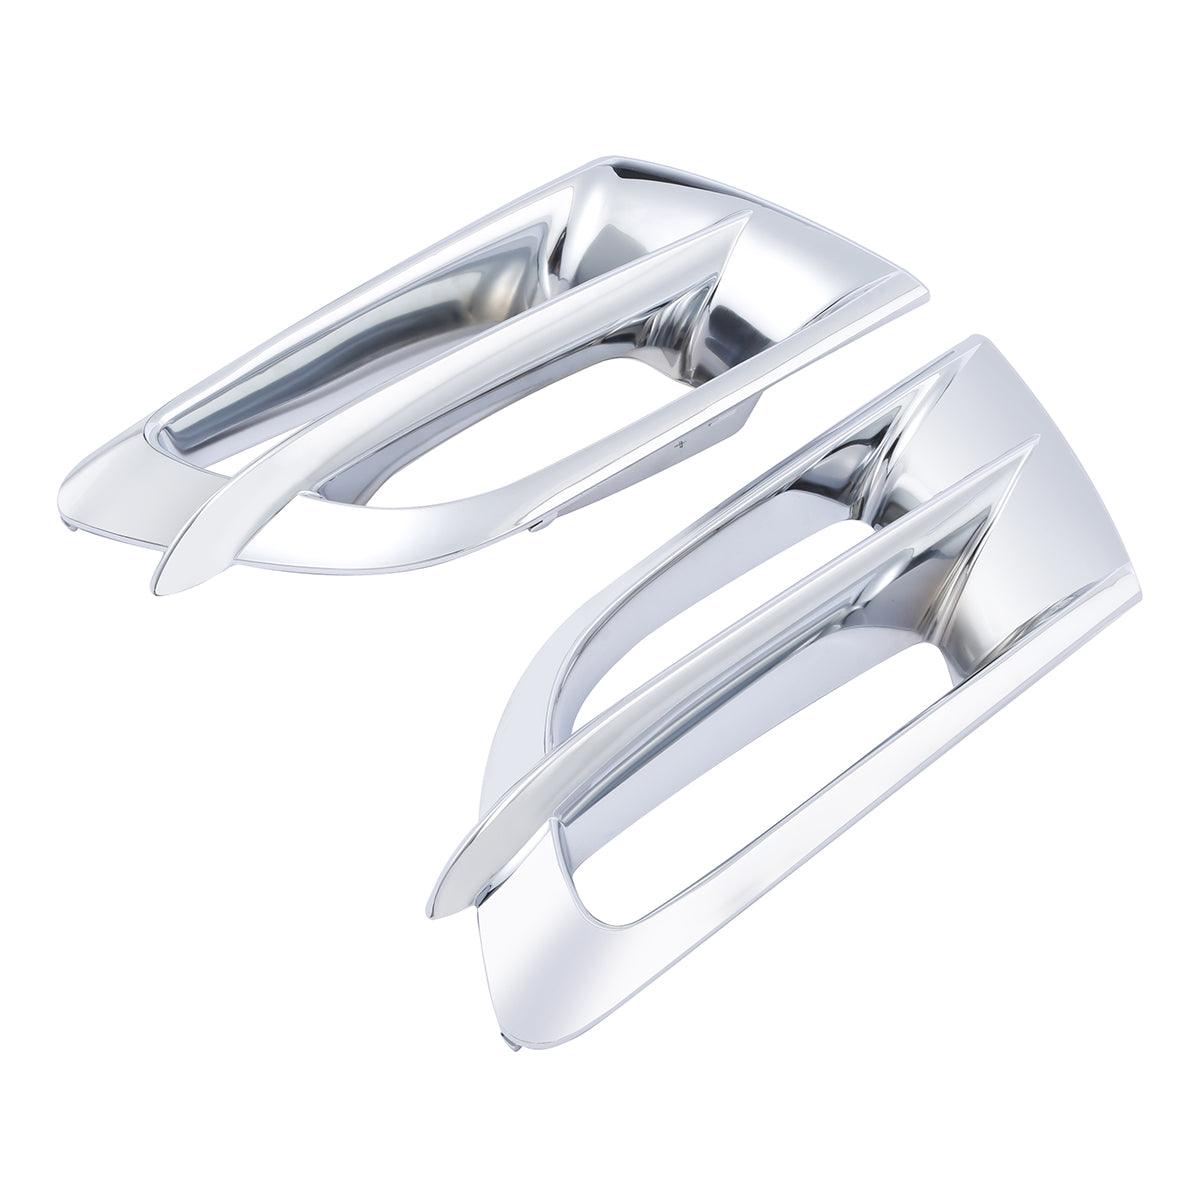 TCMT ABS Chrome Side Fairing Accent Grilles Fit For Honda Gold Wing 1800  GL1800 '01-'11